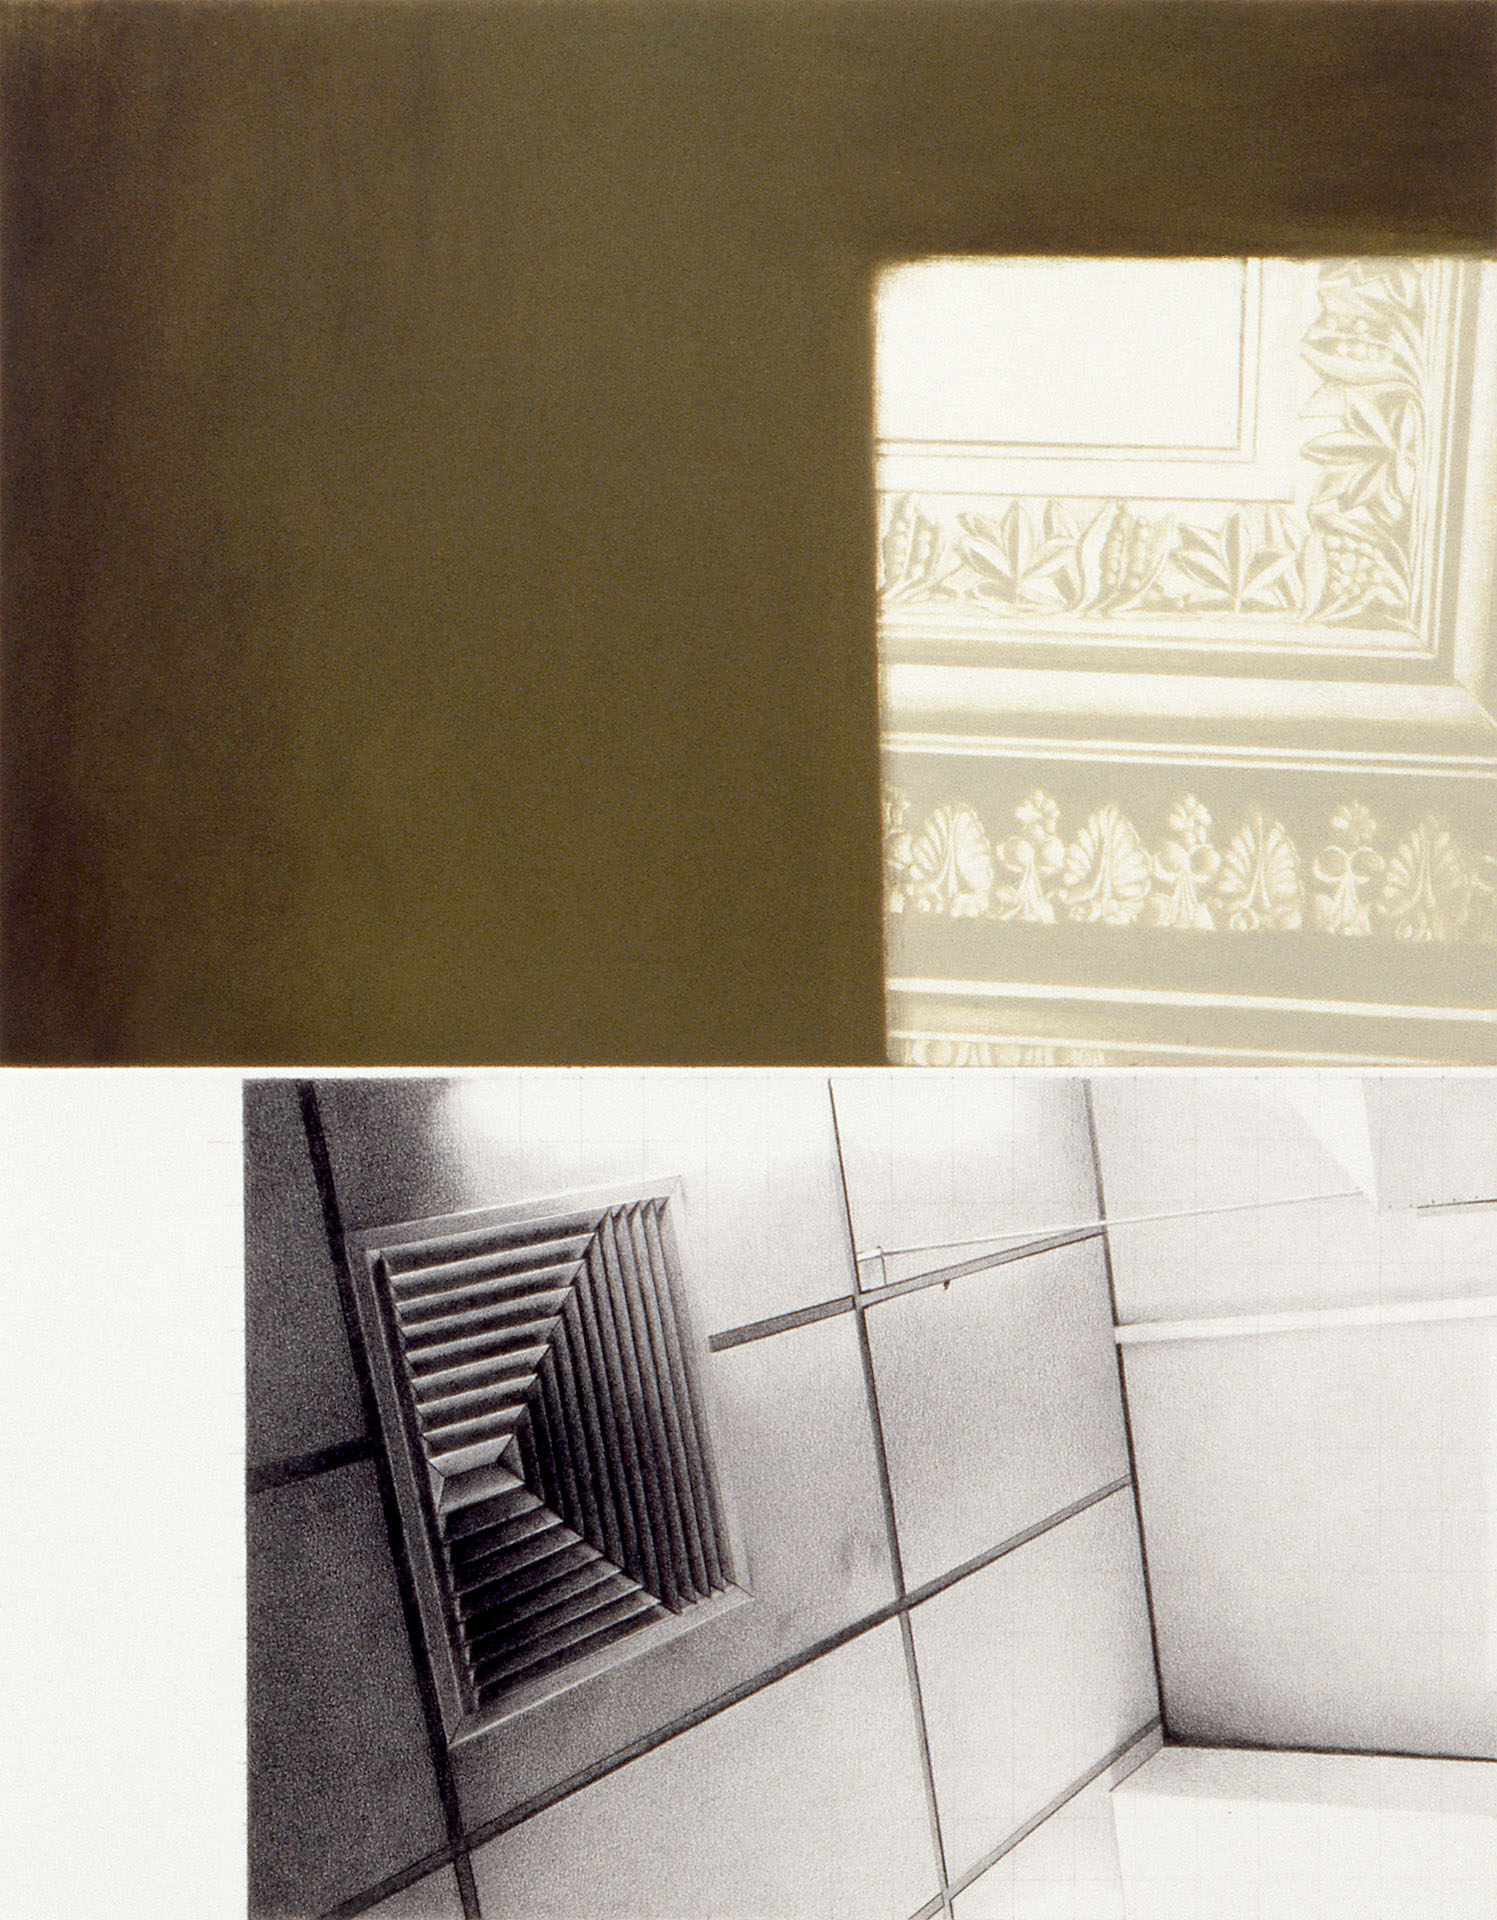  Interstice, 2003, burnished aquatint, carbon & graphite, 380 x 300mm, private collection 